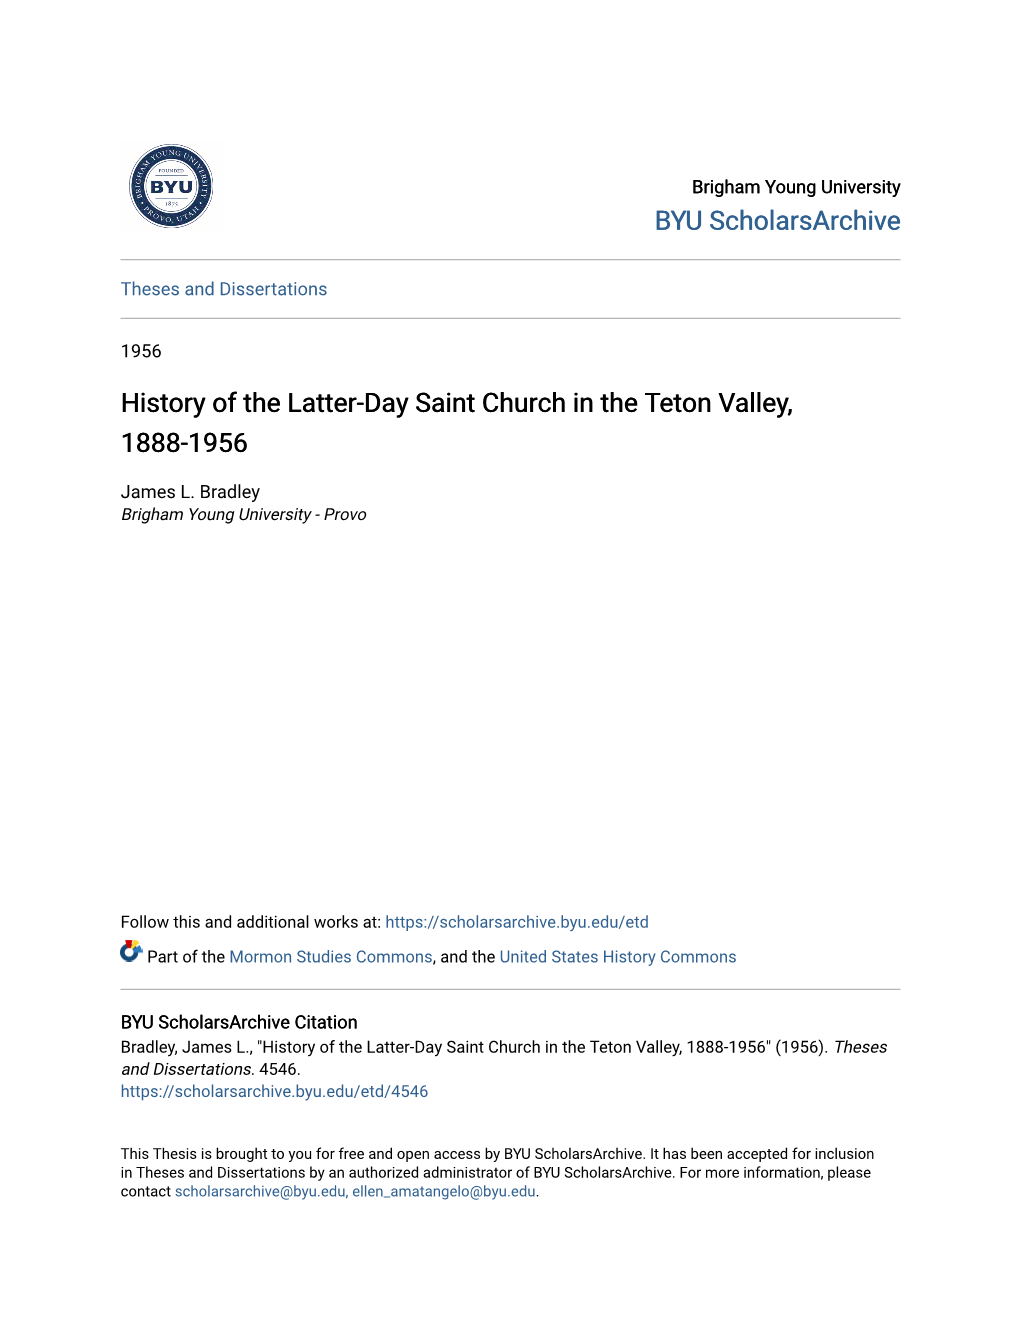 History of the Latter-Day Saint Church in the Teton Valley, 1888-1956